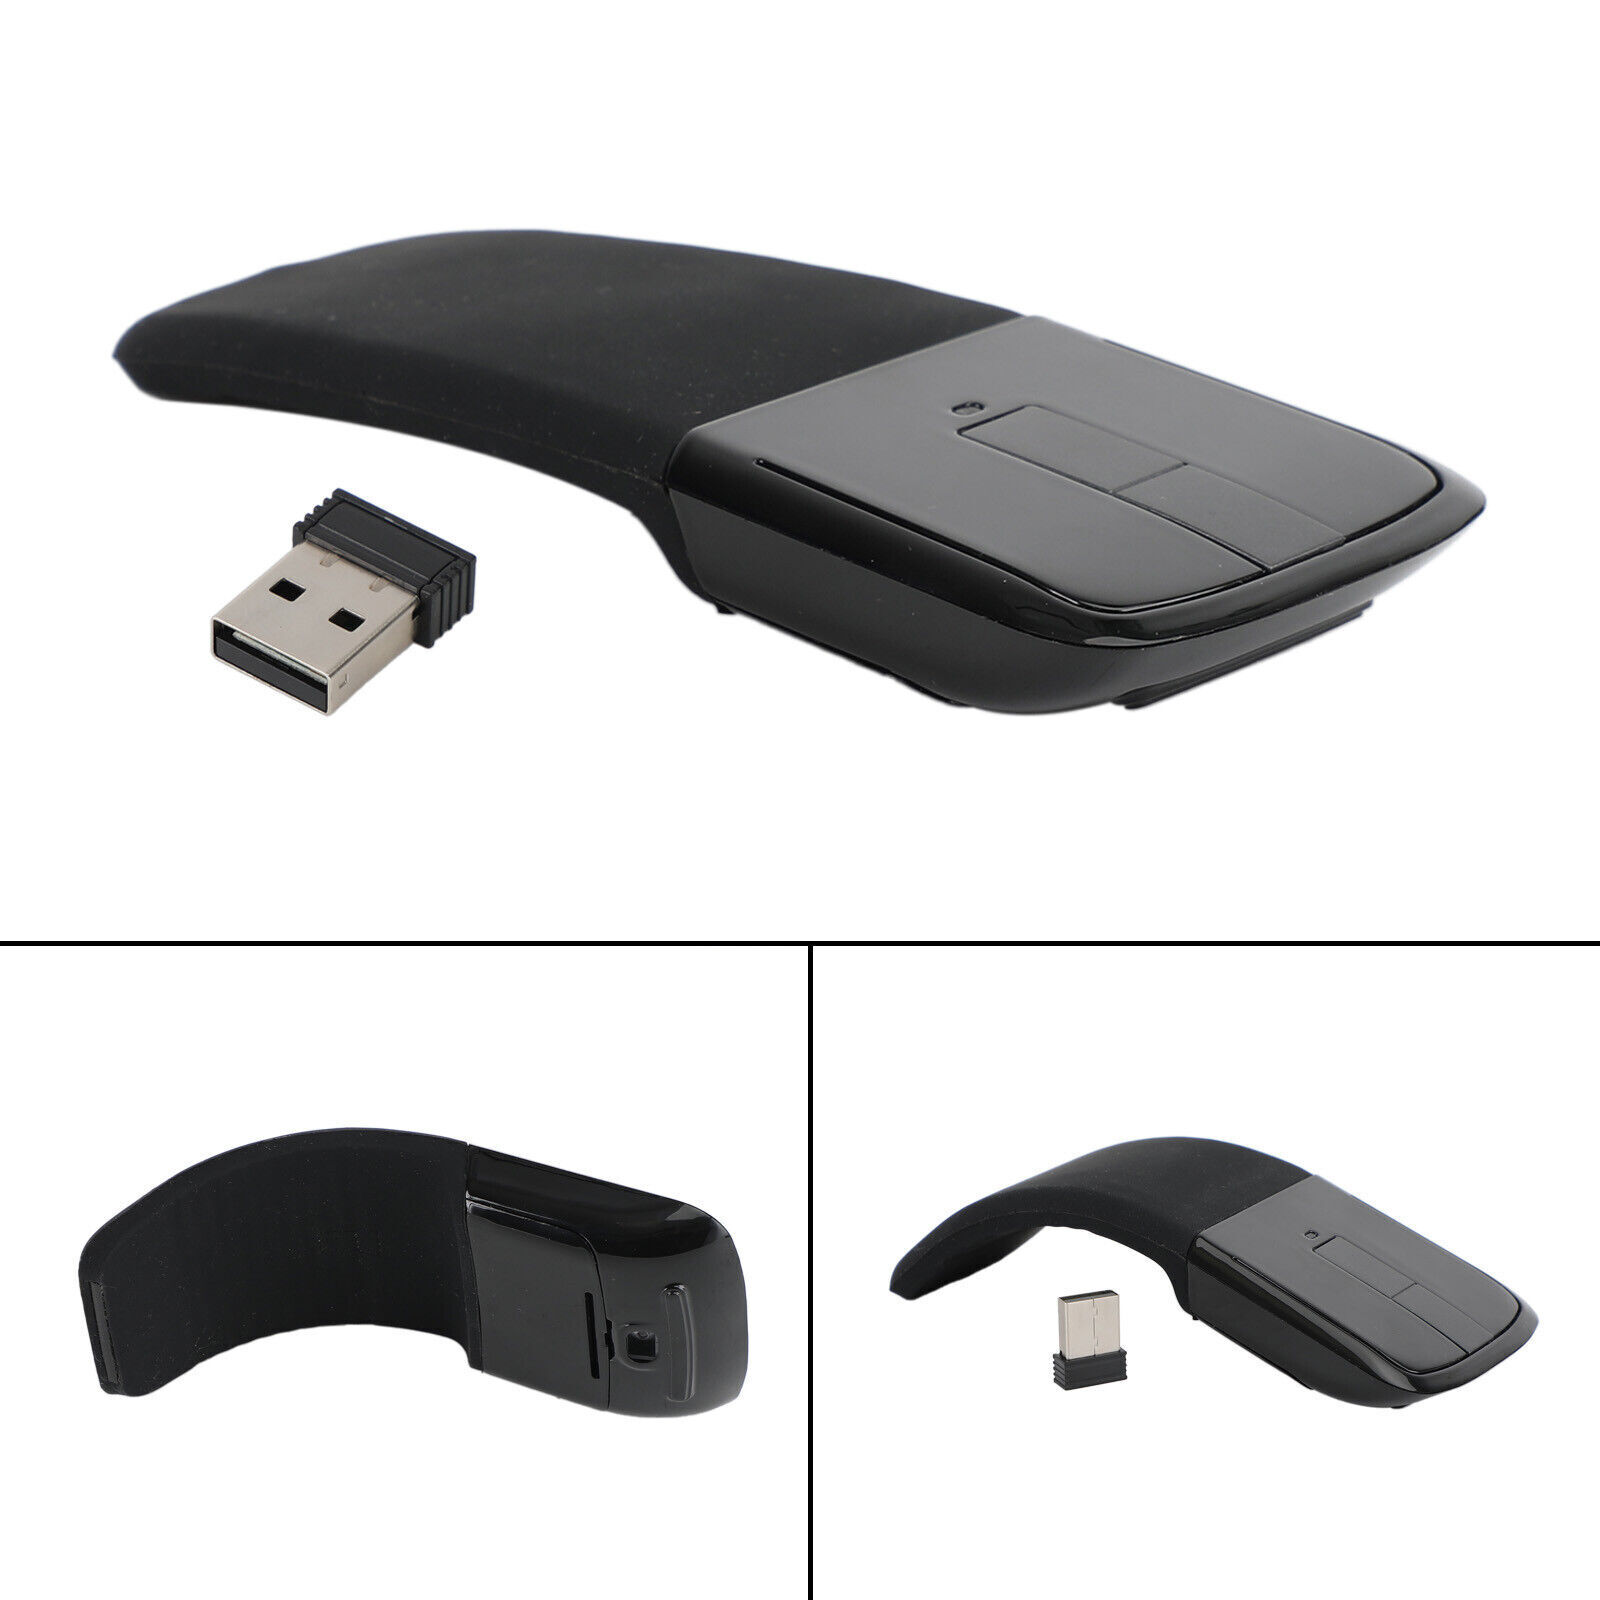 2.4GHz Foldable Arc Touch Wireless Mouse Optical Mice With USB Receiver Black